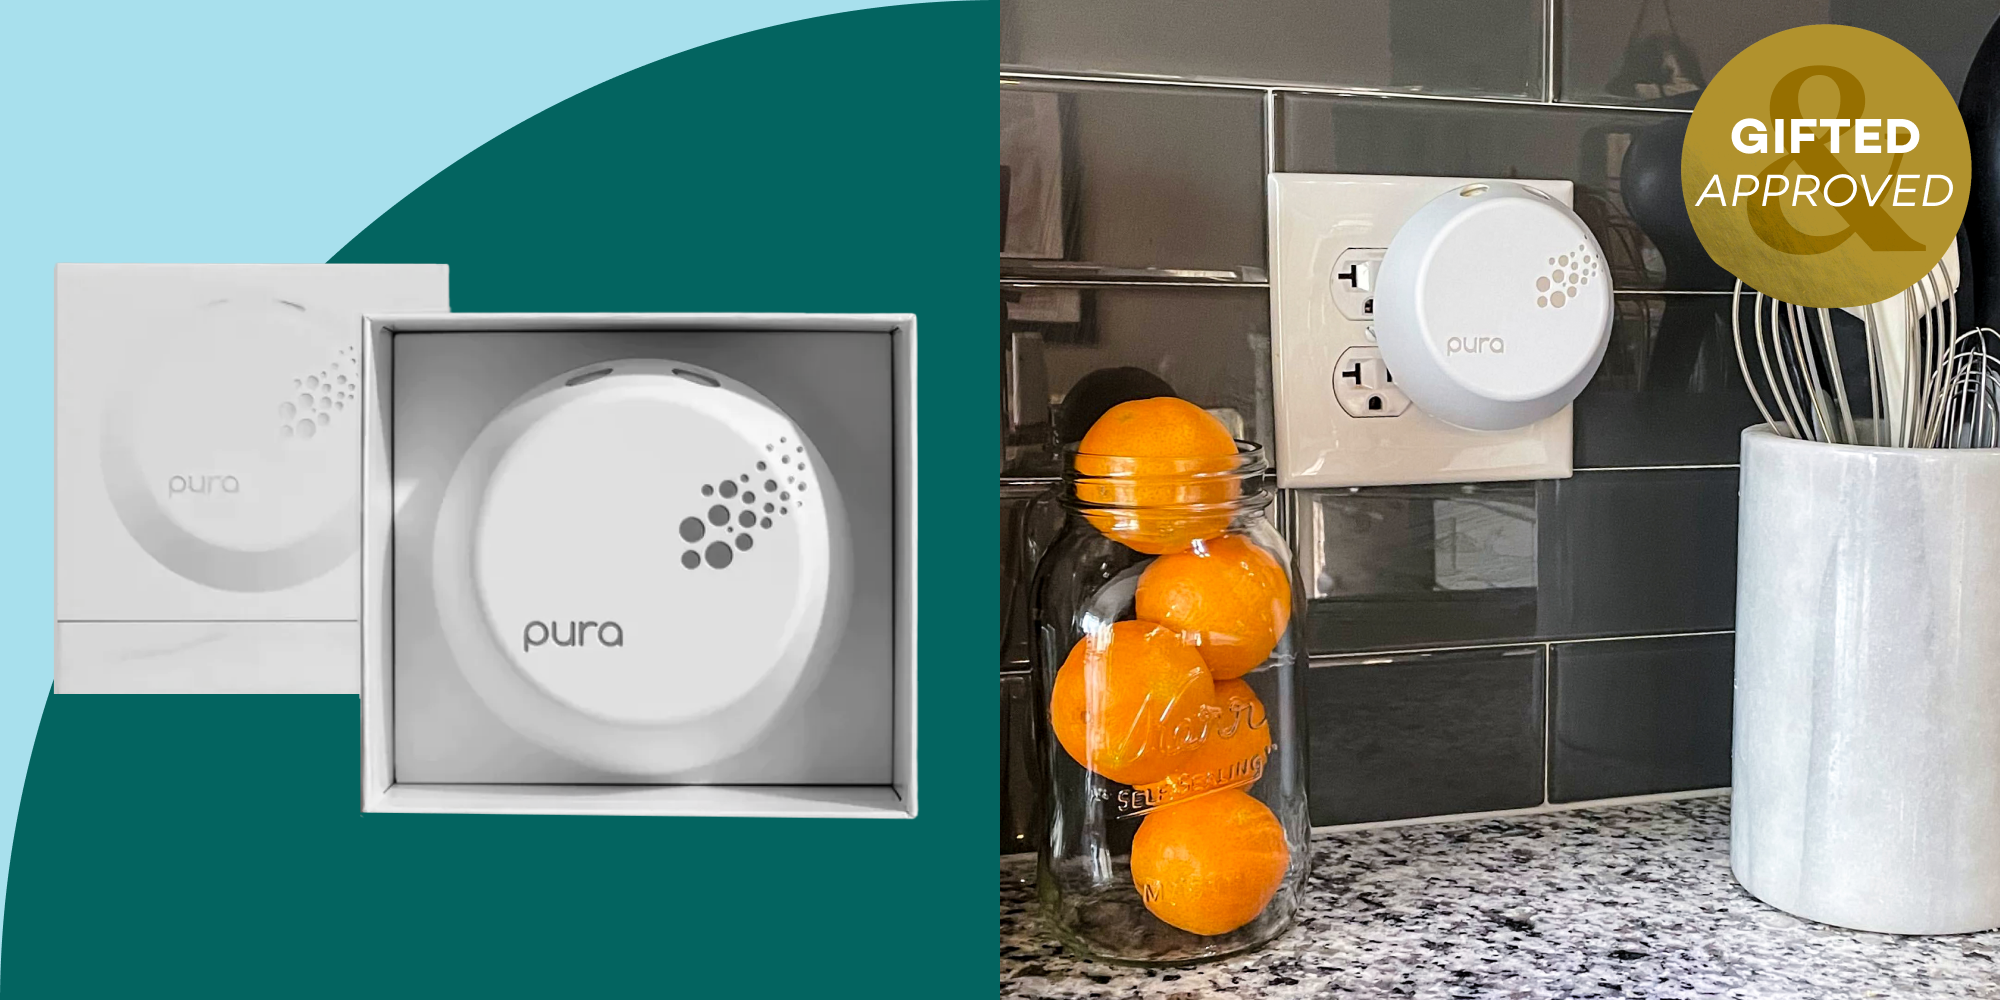 The Pura Smart Fragrance Diffuser: The Gift to Make Anyone's Home